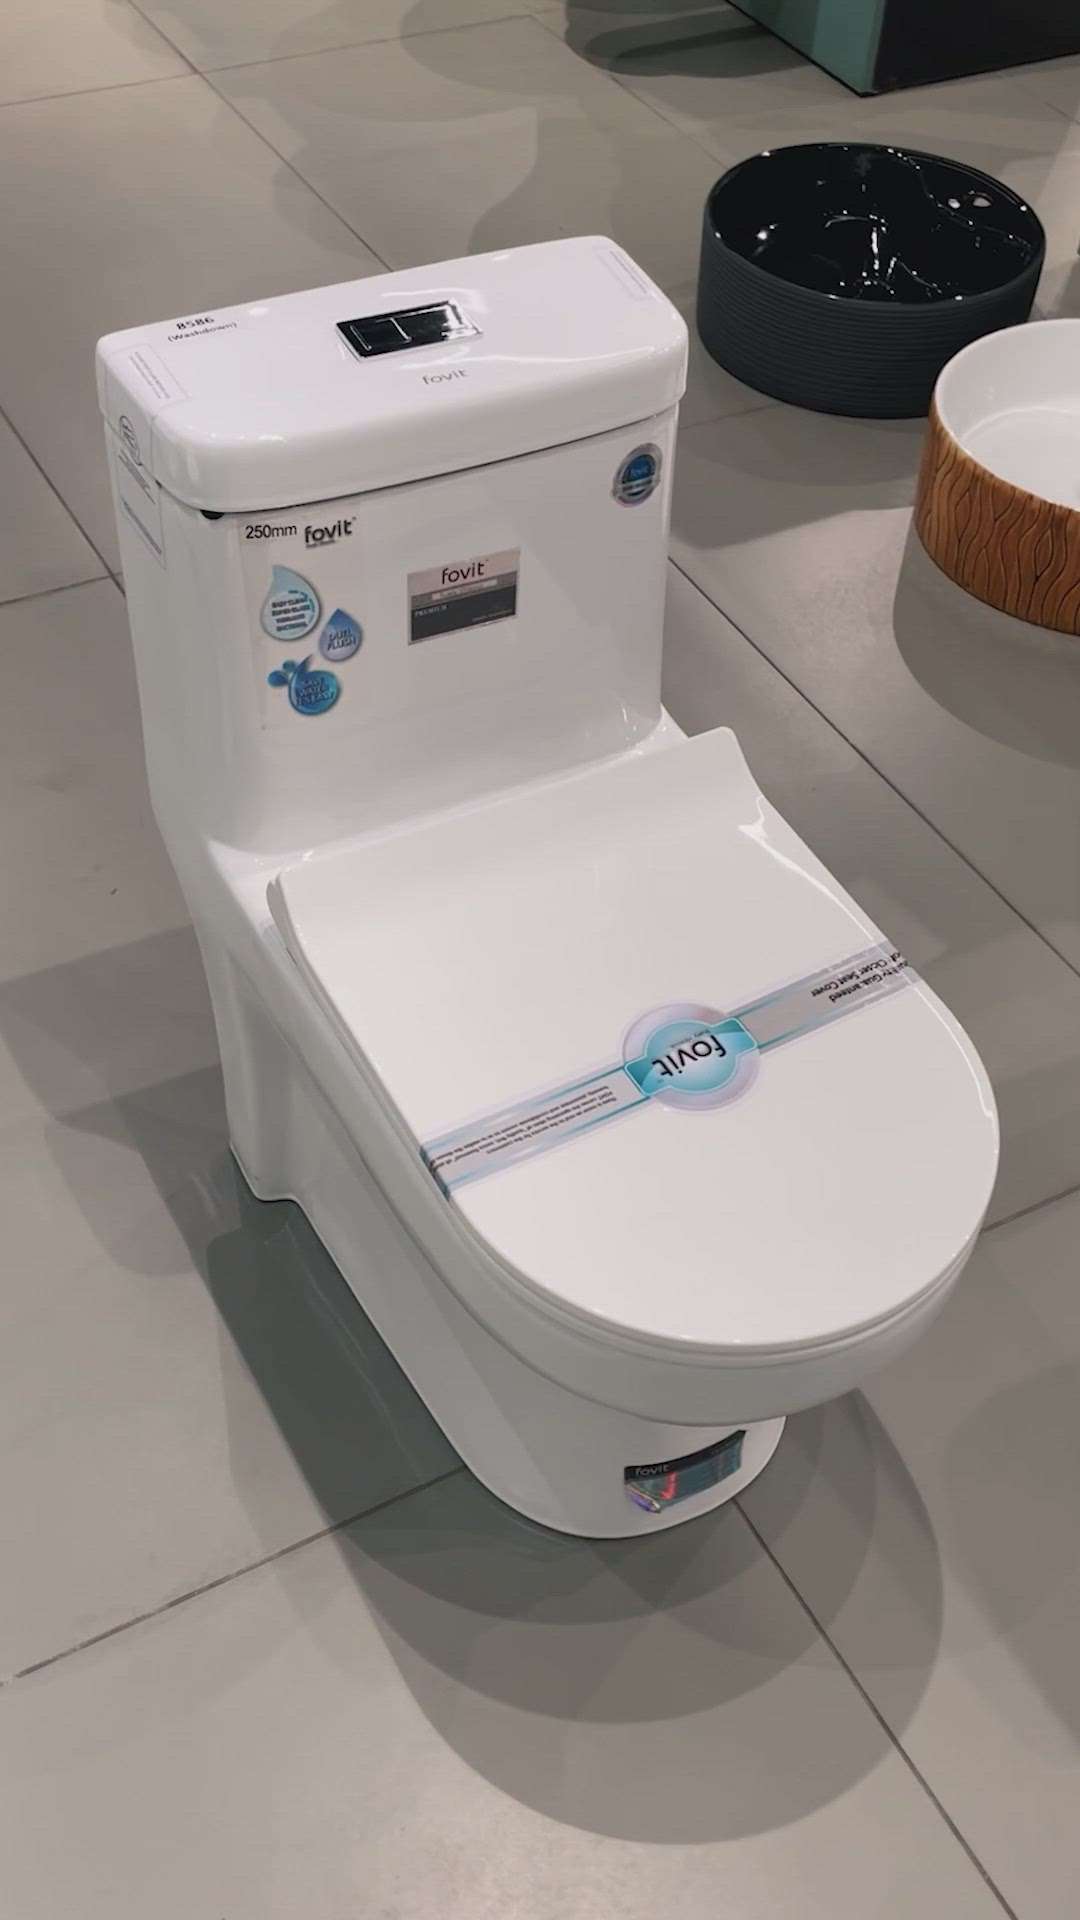 This One piece toilet is a great addition to any modern or contemporary bathroom design. 

Buy Online at abchauz.com
For more details comment or message us.

#abchauzindia #ABCGroup #homeconstruction #toilets #sanitarywares #bathroomfittings #bathroomrenovation #bathroomdesign